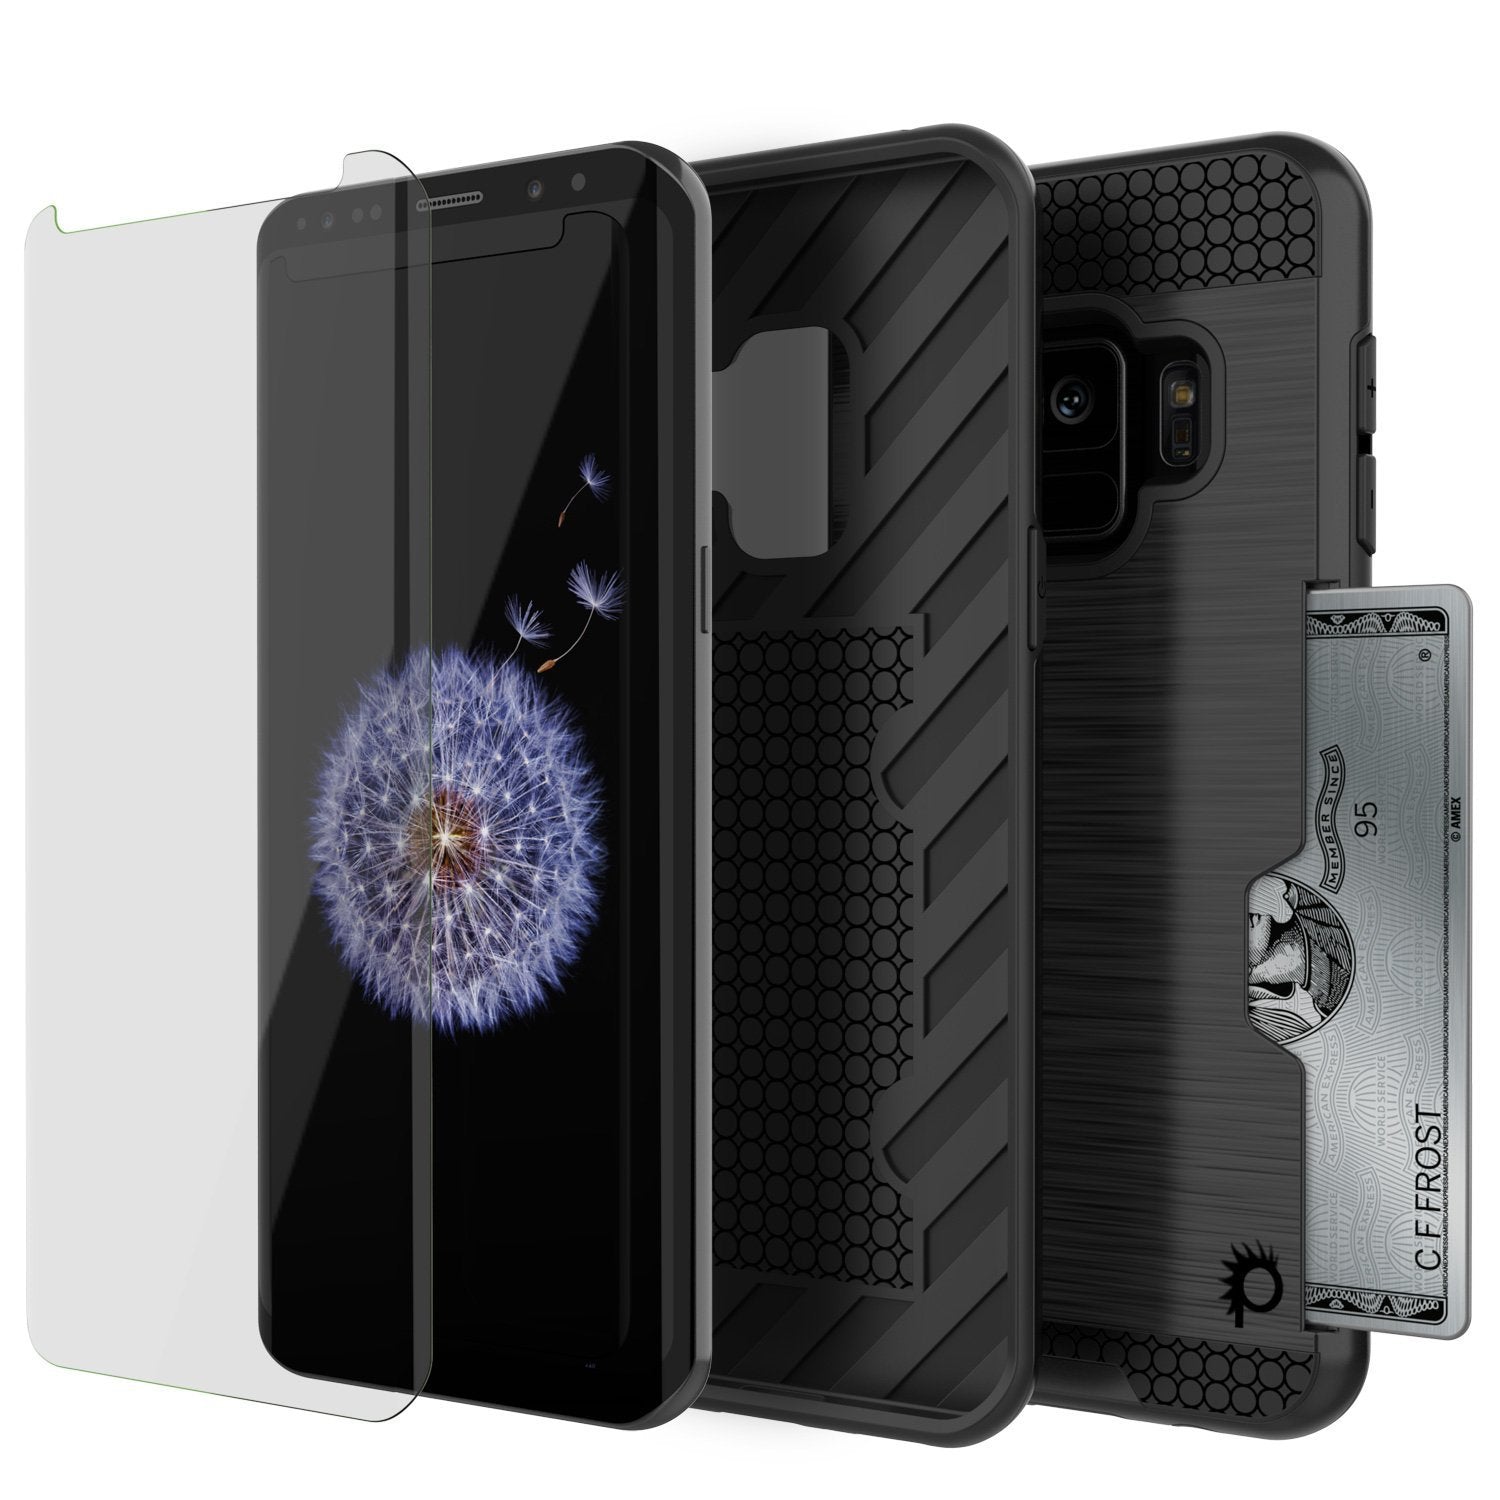 Galaxy S9 Case, PUNKcase [SLOT Series] [Slim Fit] Dual-Layer Armor Cover w/Integrated Anti-Shock System, Credit Card Slot [Black]